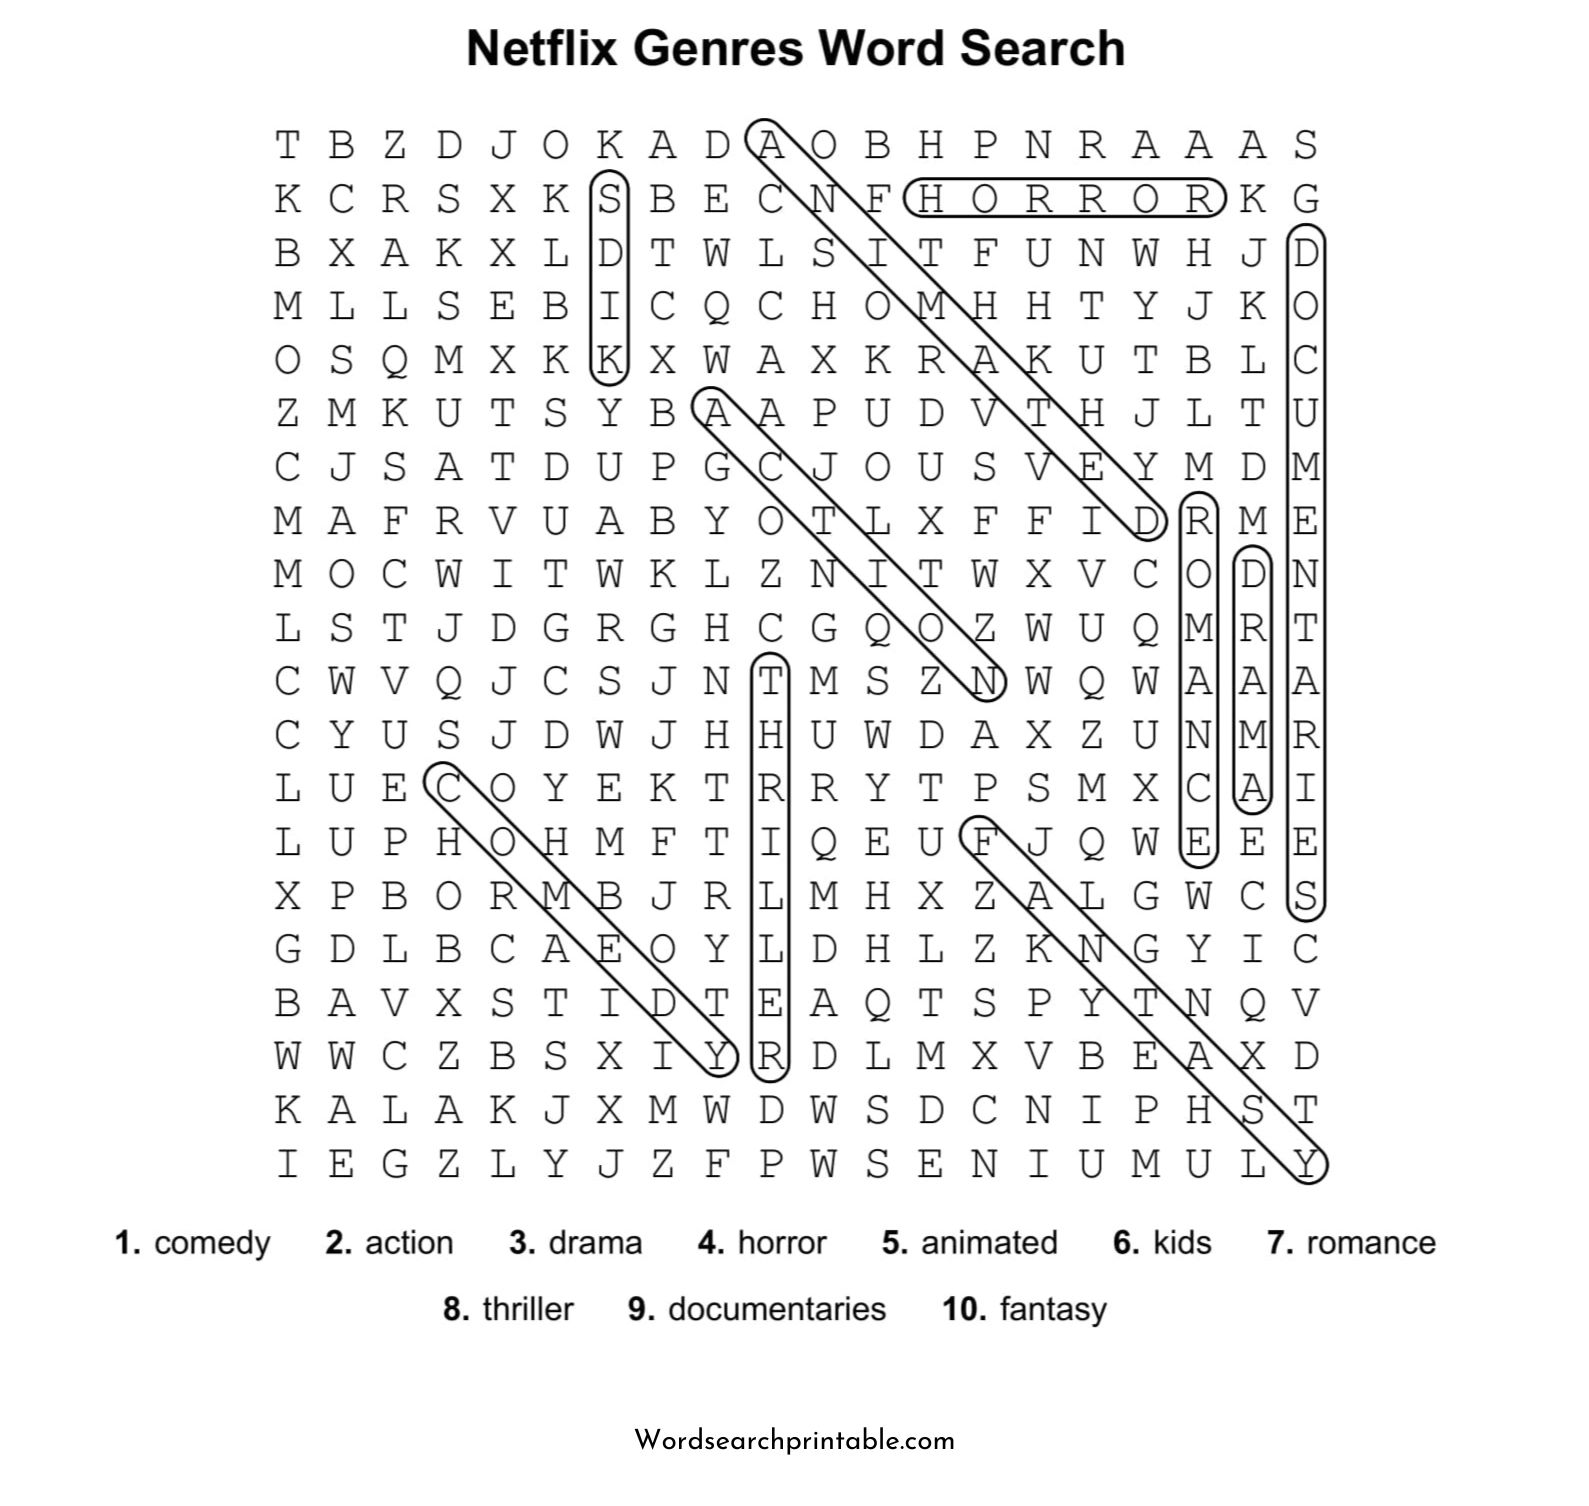 netflix genres word search puzzle solution